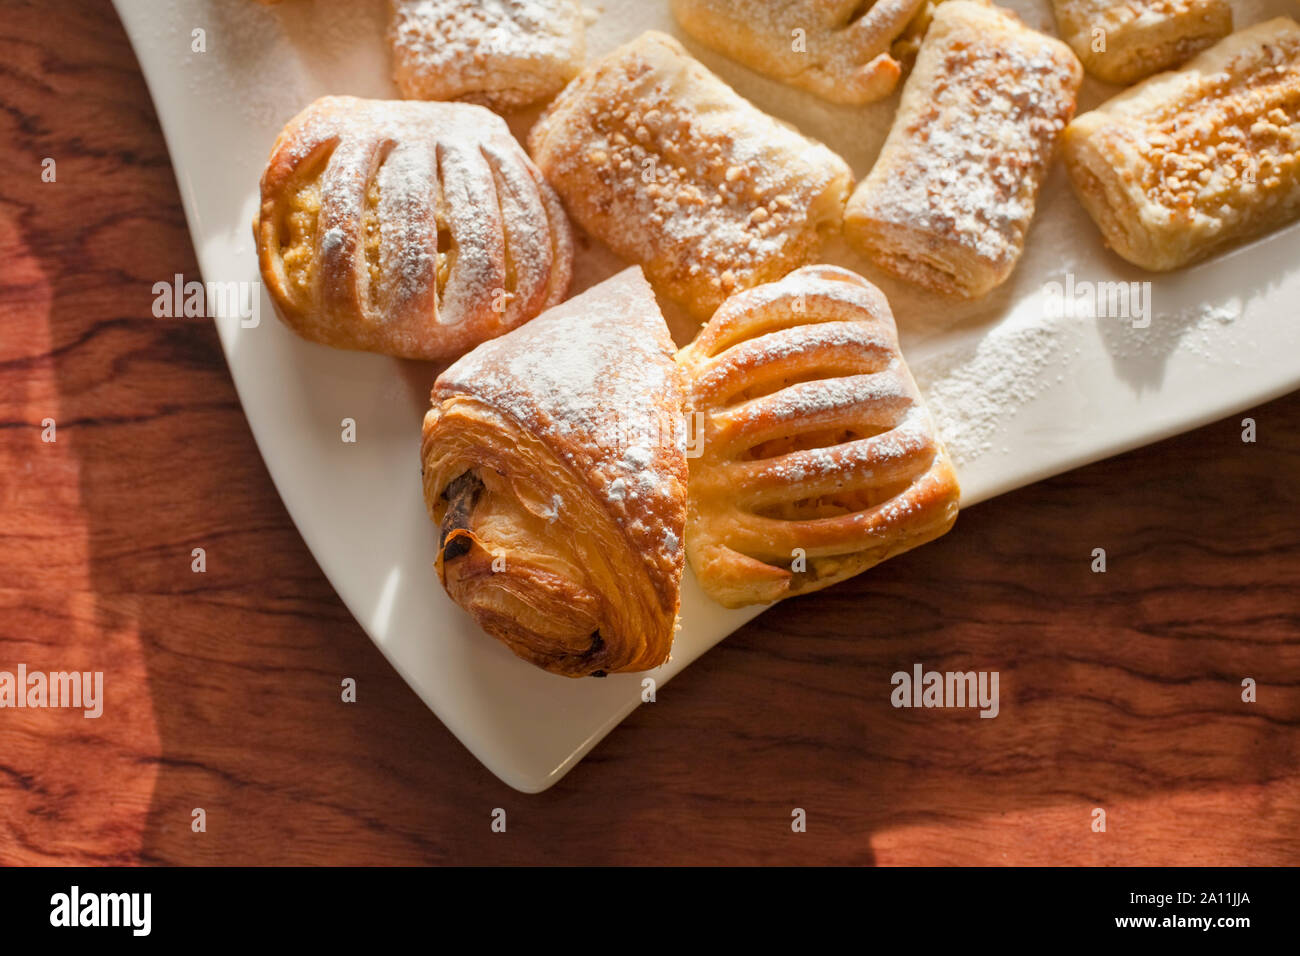 Pastries, Danish pastry group on a plate Stock Photo